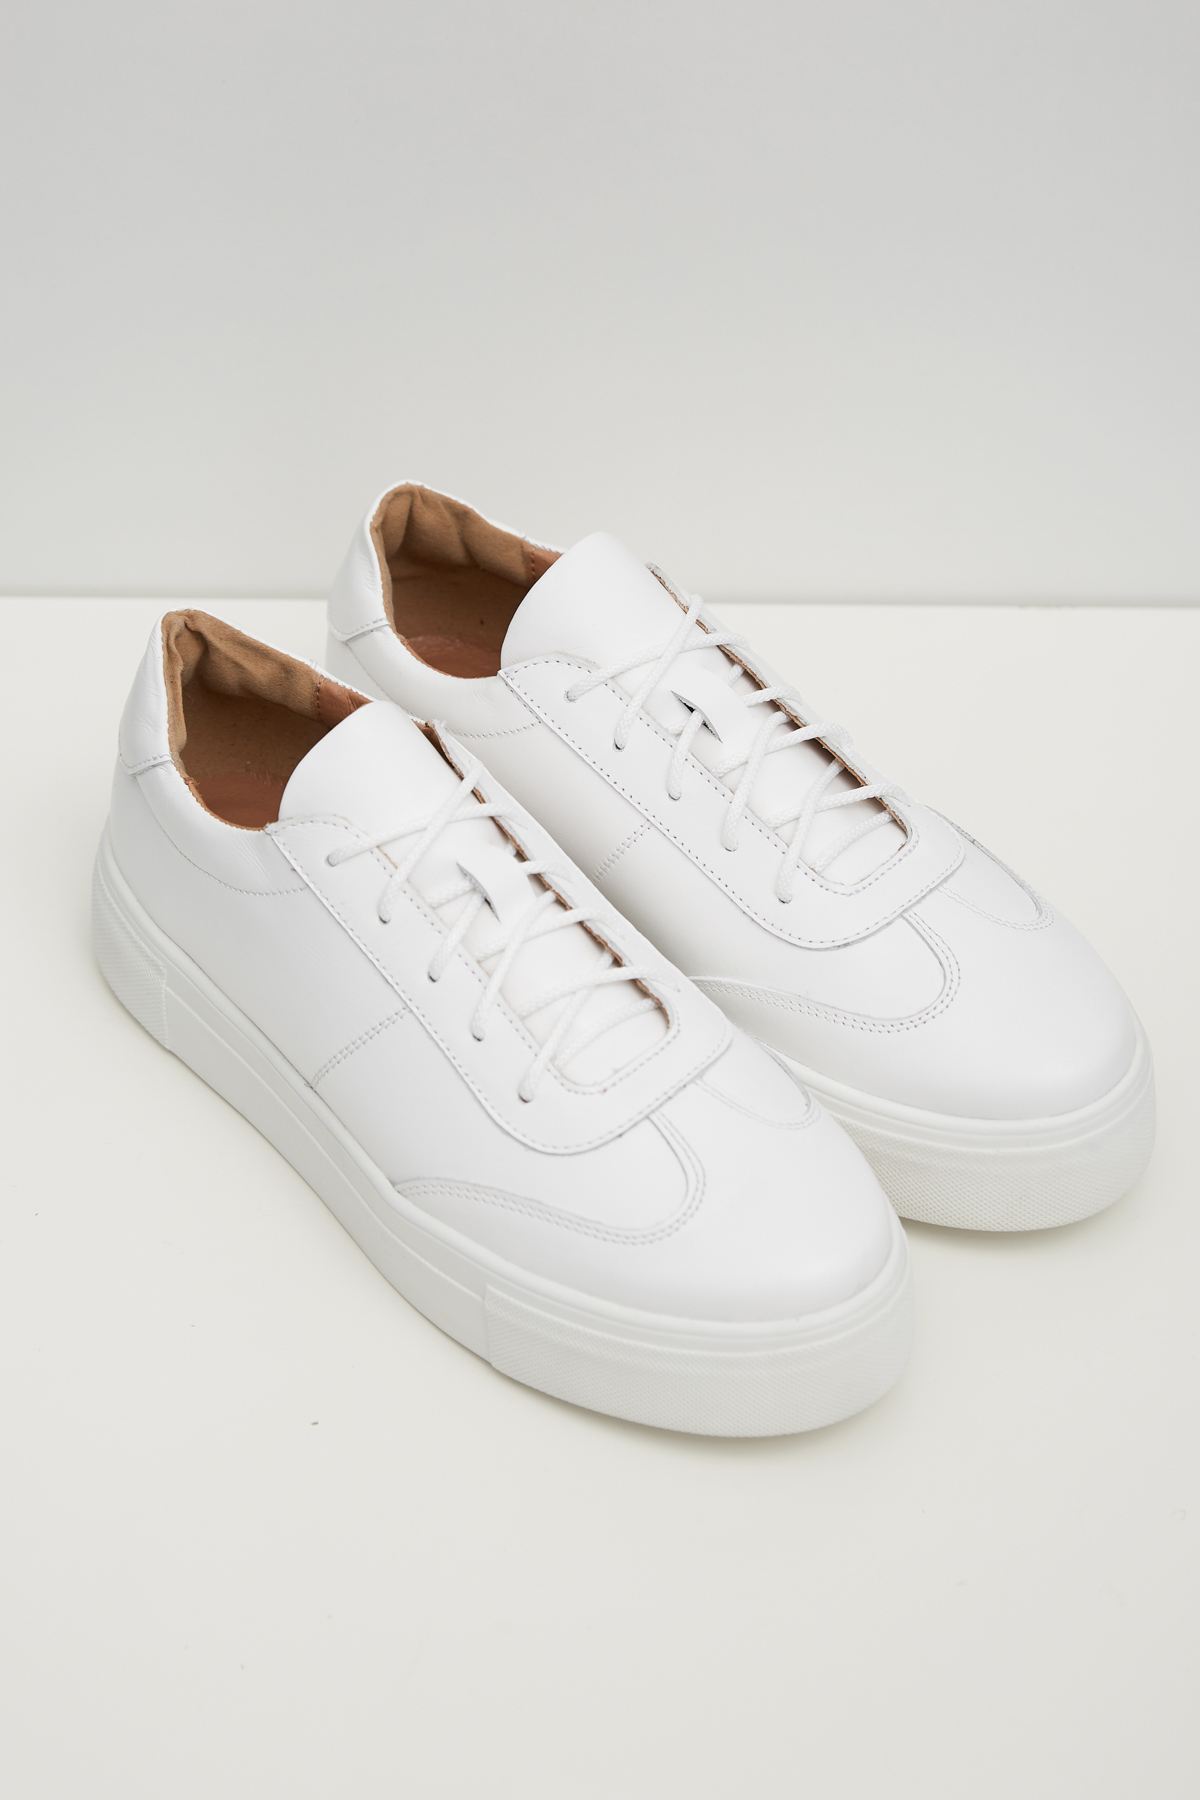 White leather sneakers with thick soles, photo 1